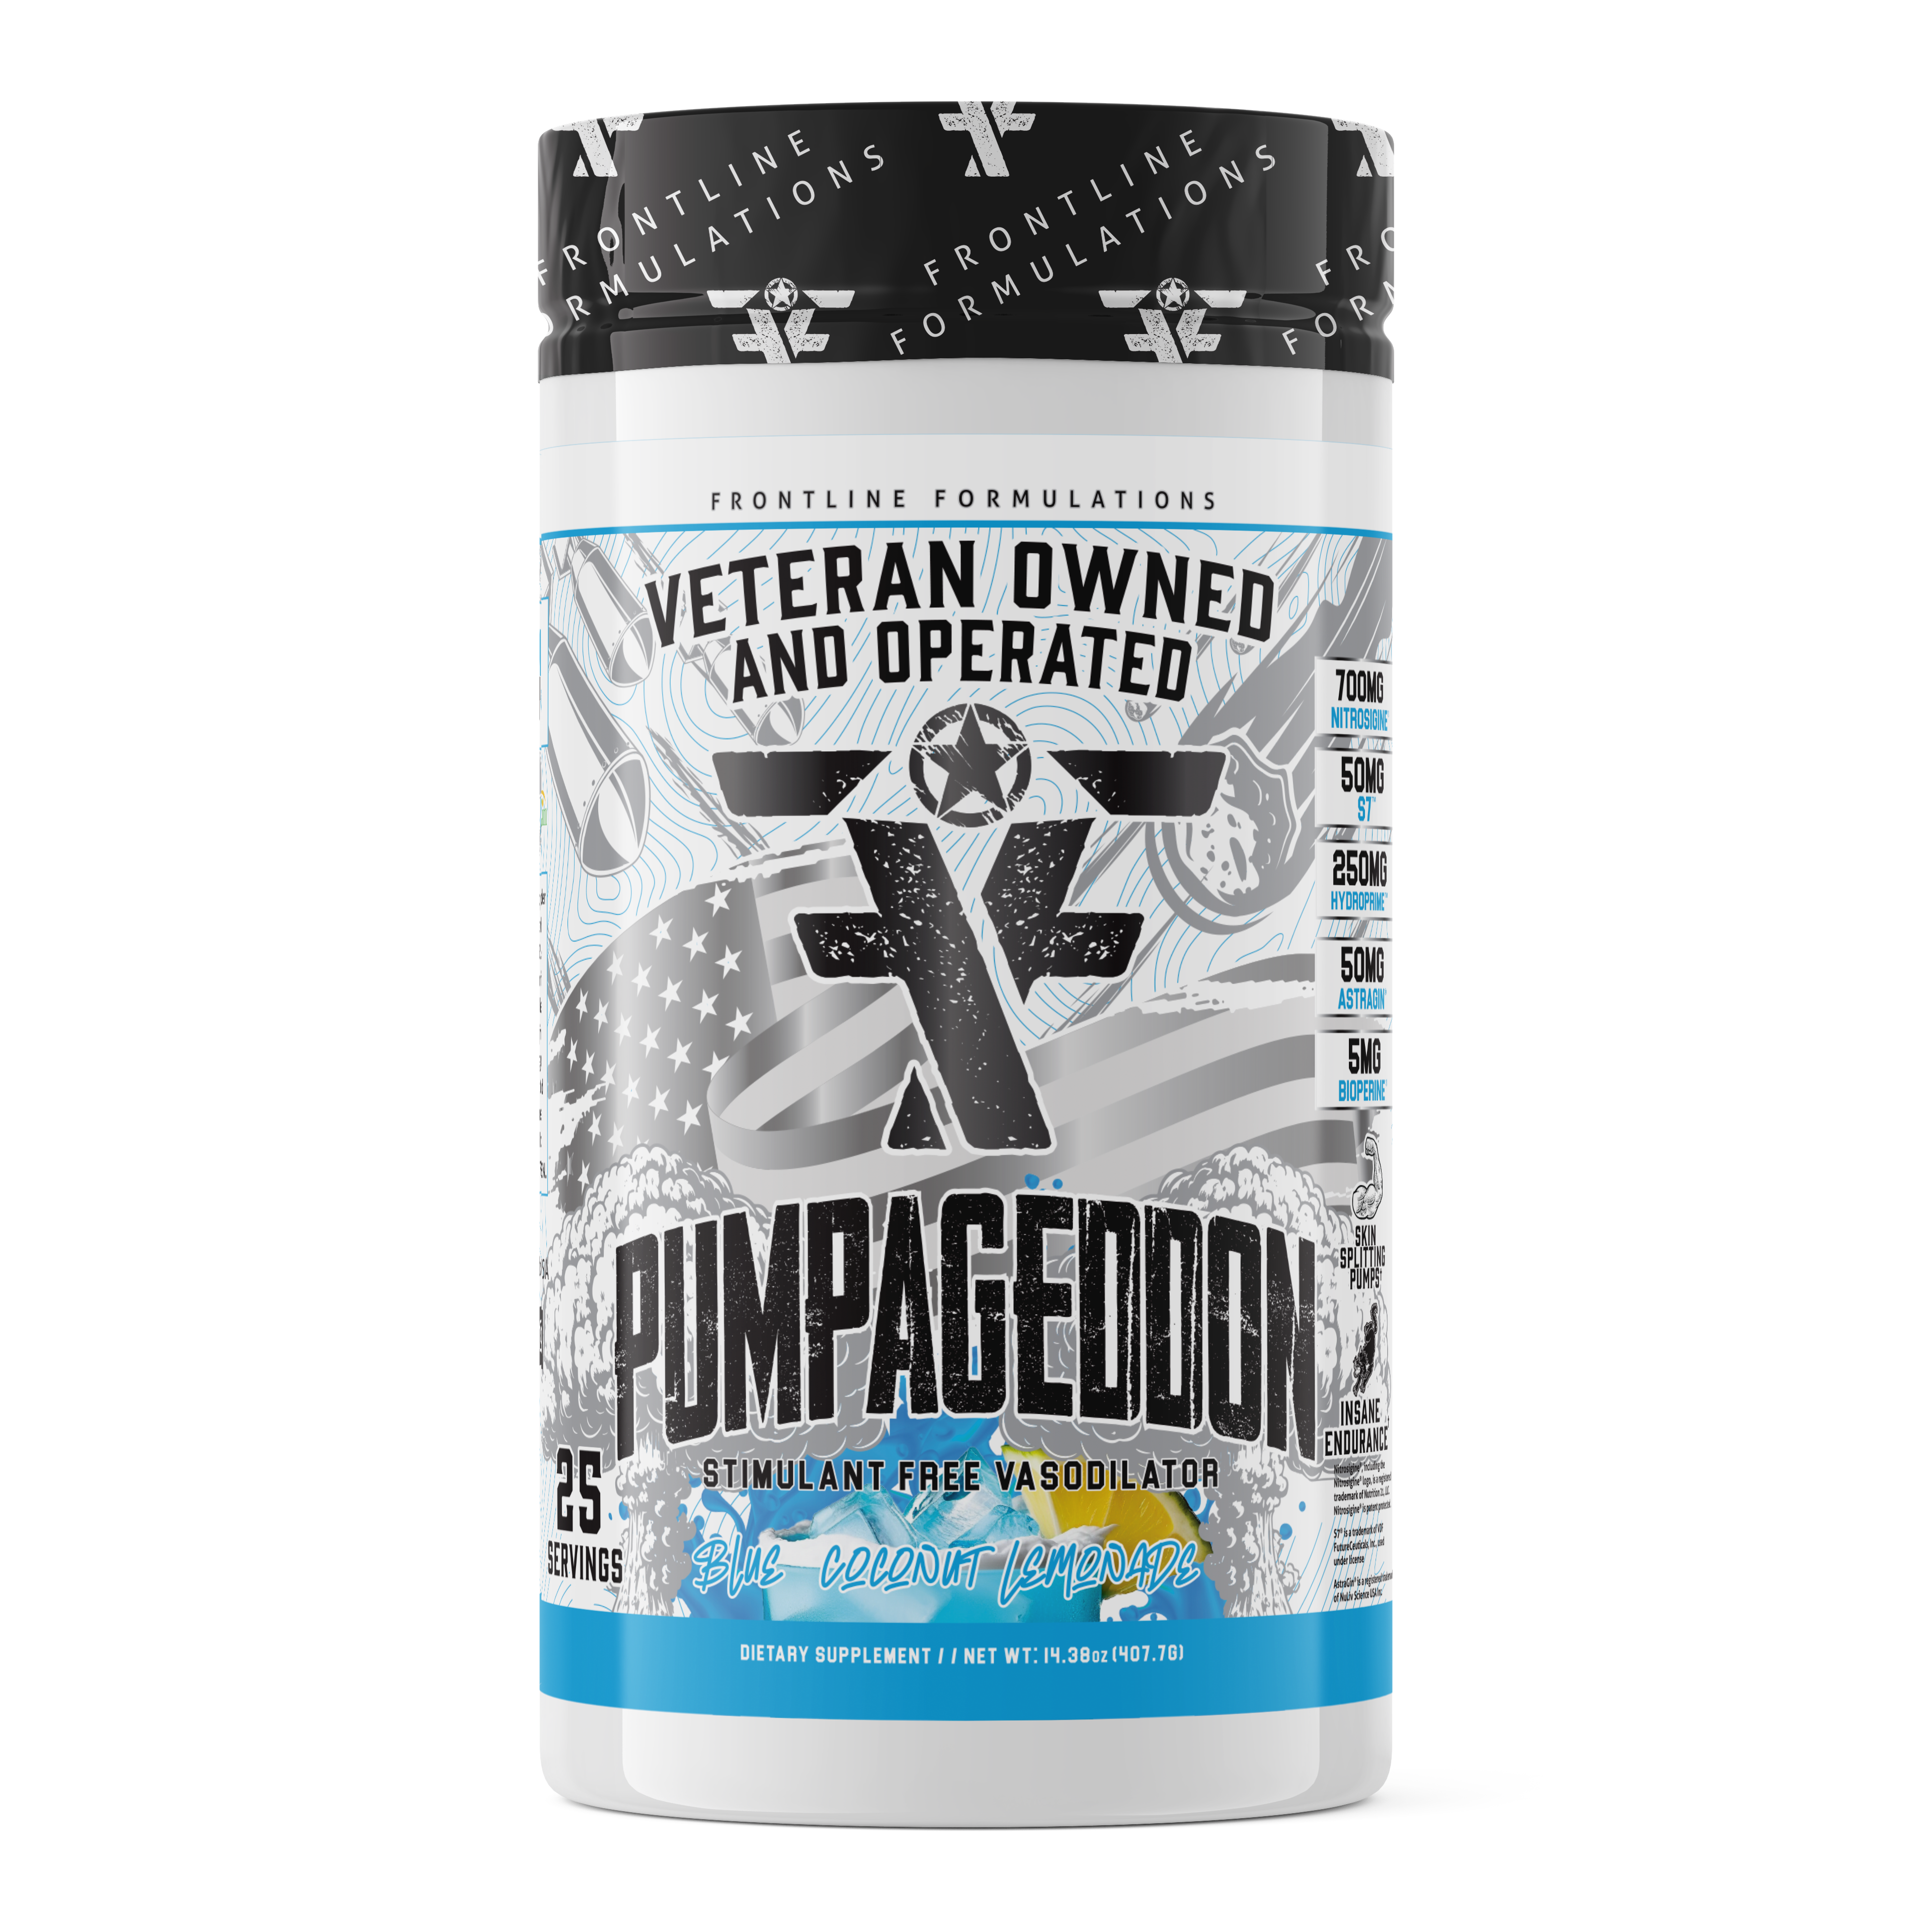 Pumpageddon Strap in! This concoction is for people who chase only the most ridiculous pumps! With a jaw-dropping 7,000mg of L-Citruline Malate and key ingredients like nitrosigine, beta alanine, and S7, this caffeine-free pre-workout will give you the sk